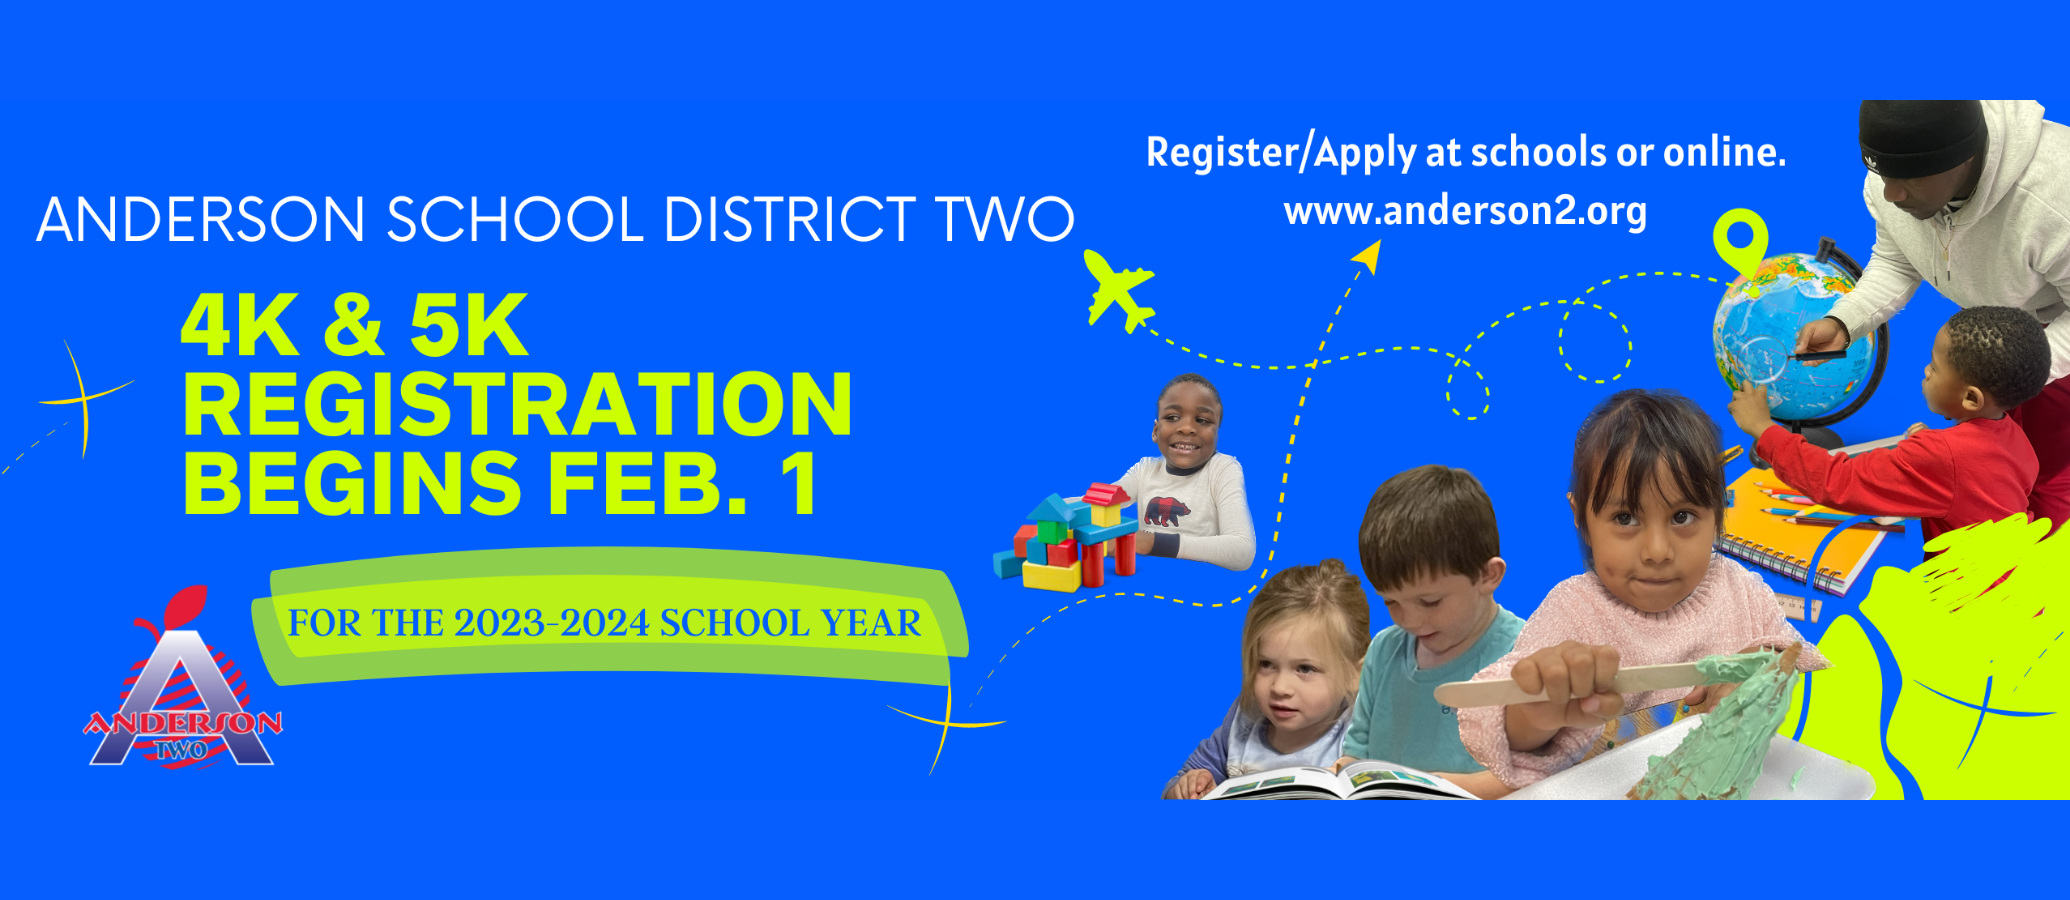 Anderson School District Two; 4k and 5k registration opens february 1 for the 2023-2024 school year. Register/Apply at schools or online, www.anderson2.org